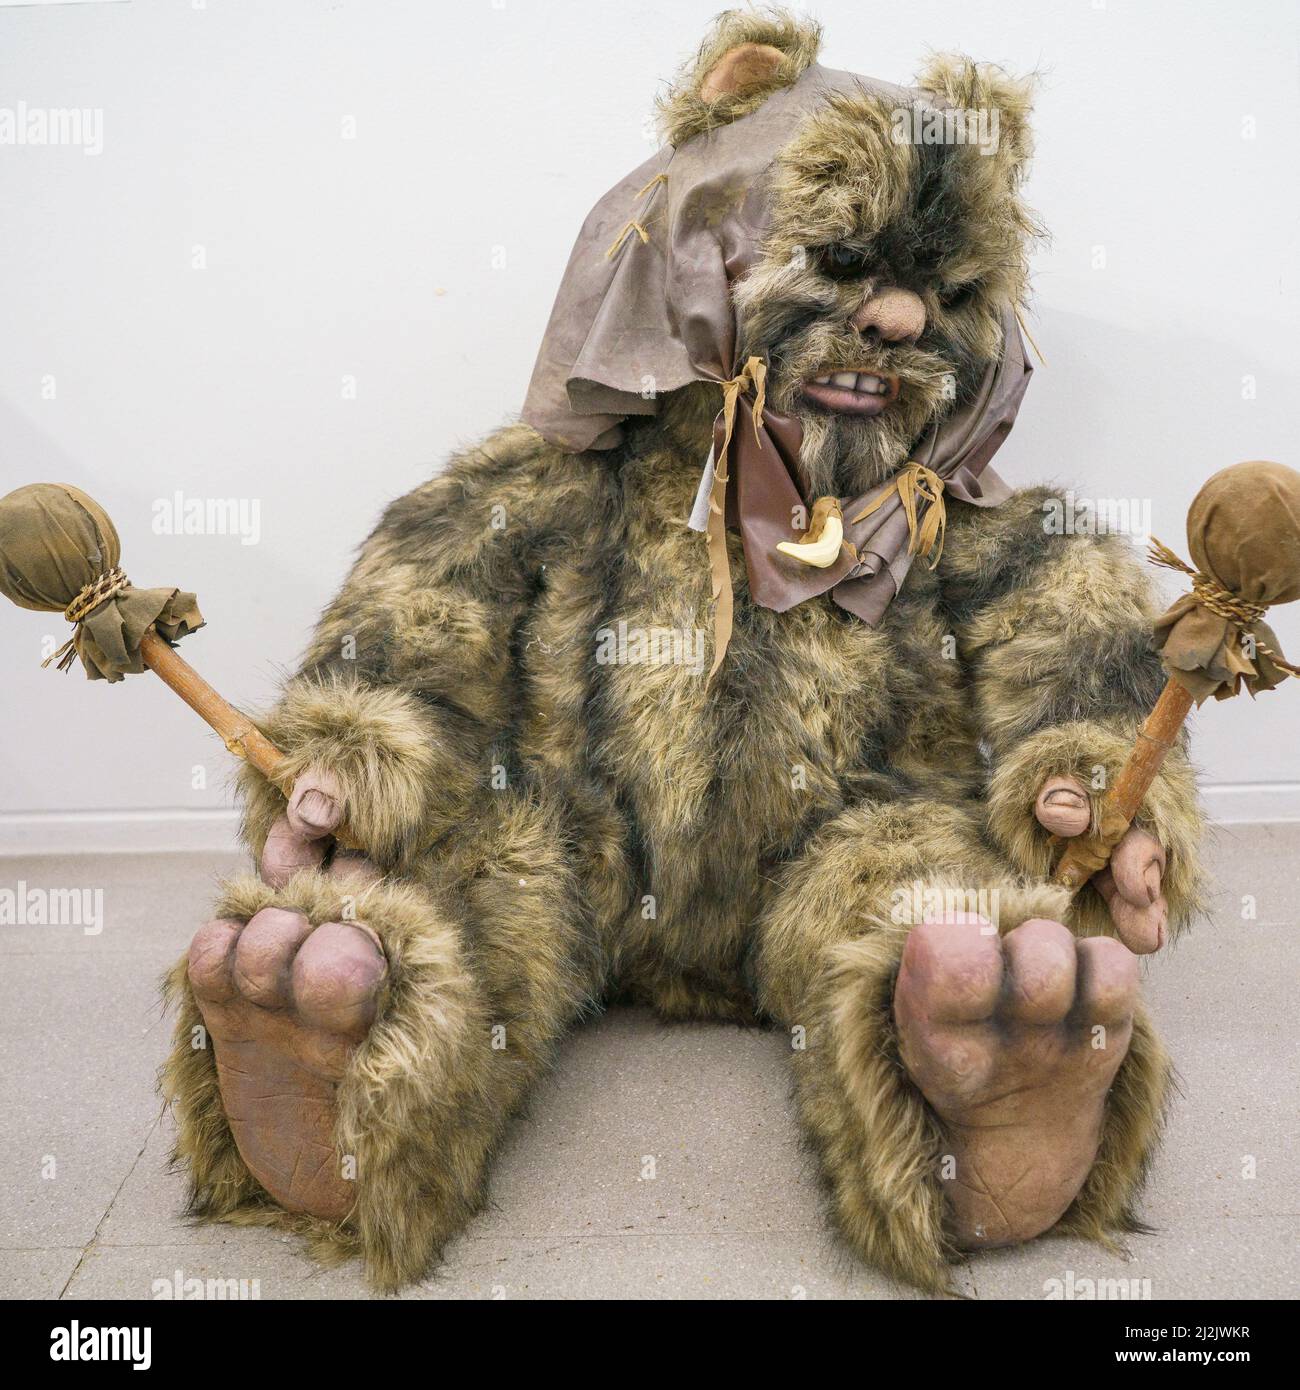 A figure of the character Ewok is exhibited during the exhibition of 'the Star Wars universe' by the sculptor Juan Villa at the Paco de Lucía exhibition hall in Madrid. The Star Wars universe can be visited for free until April 28 at the Paco de Lucía exhibition hall. The exhibited pieces are part of the work that this master craftsman is developing with his team for the future permanent exhibition Puerto Espacio, a science fiction project of his own. Stock Photo